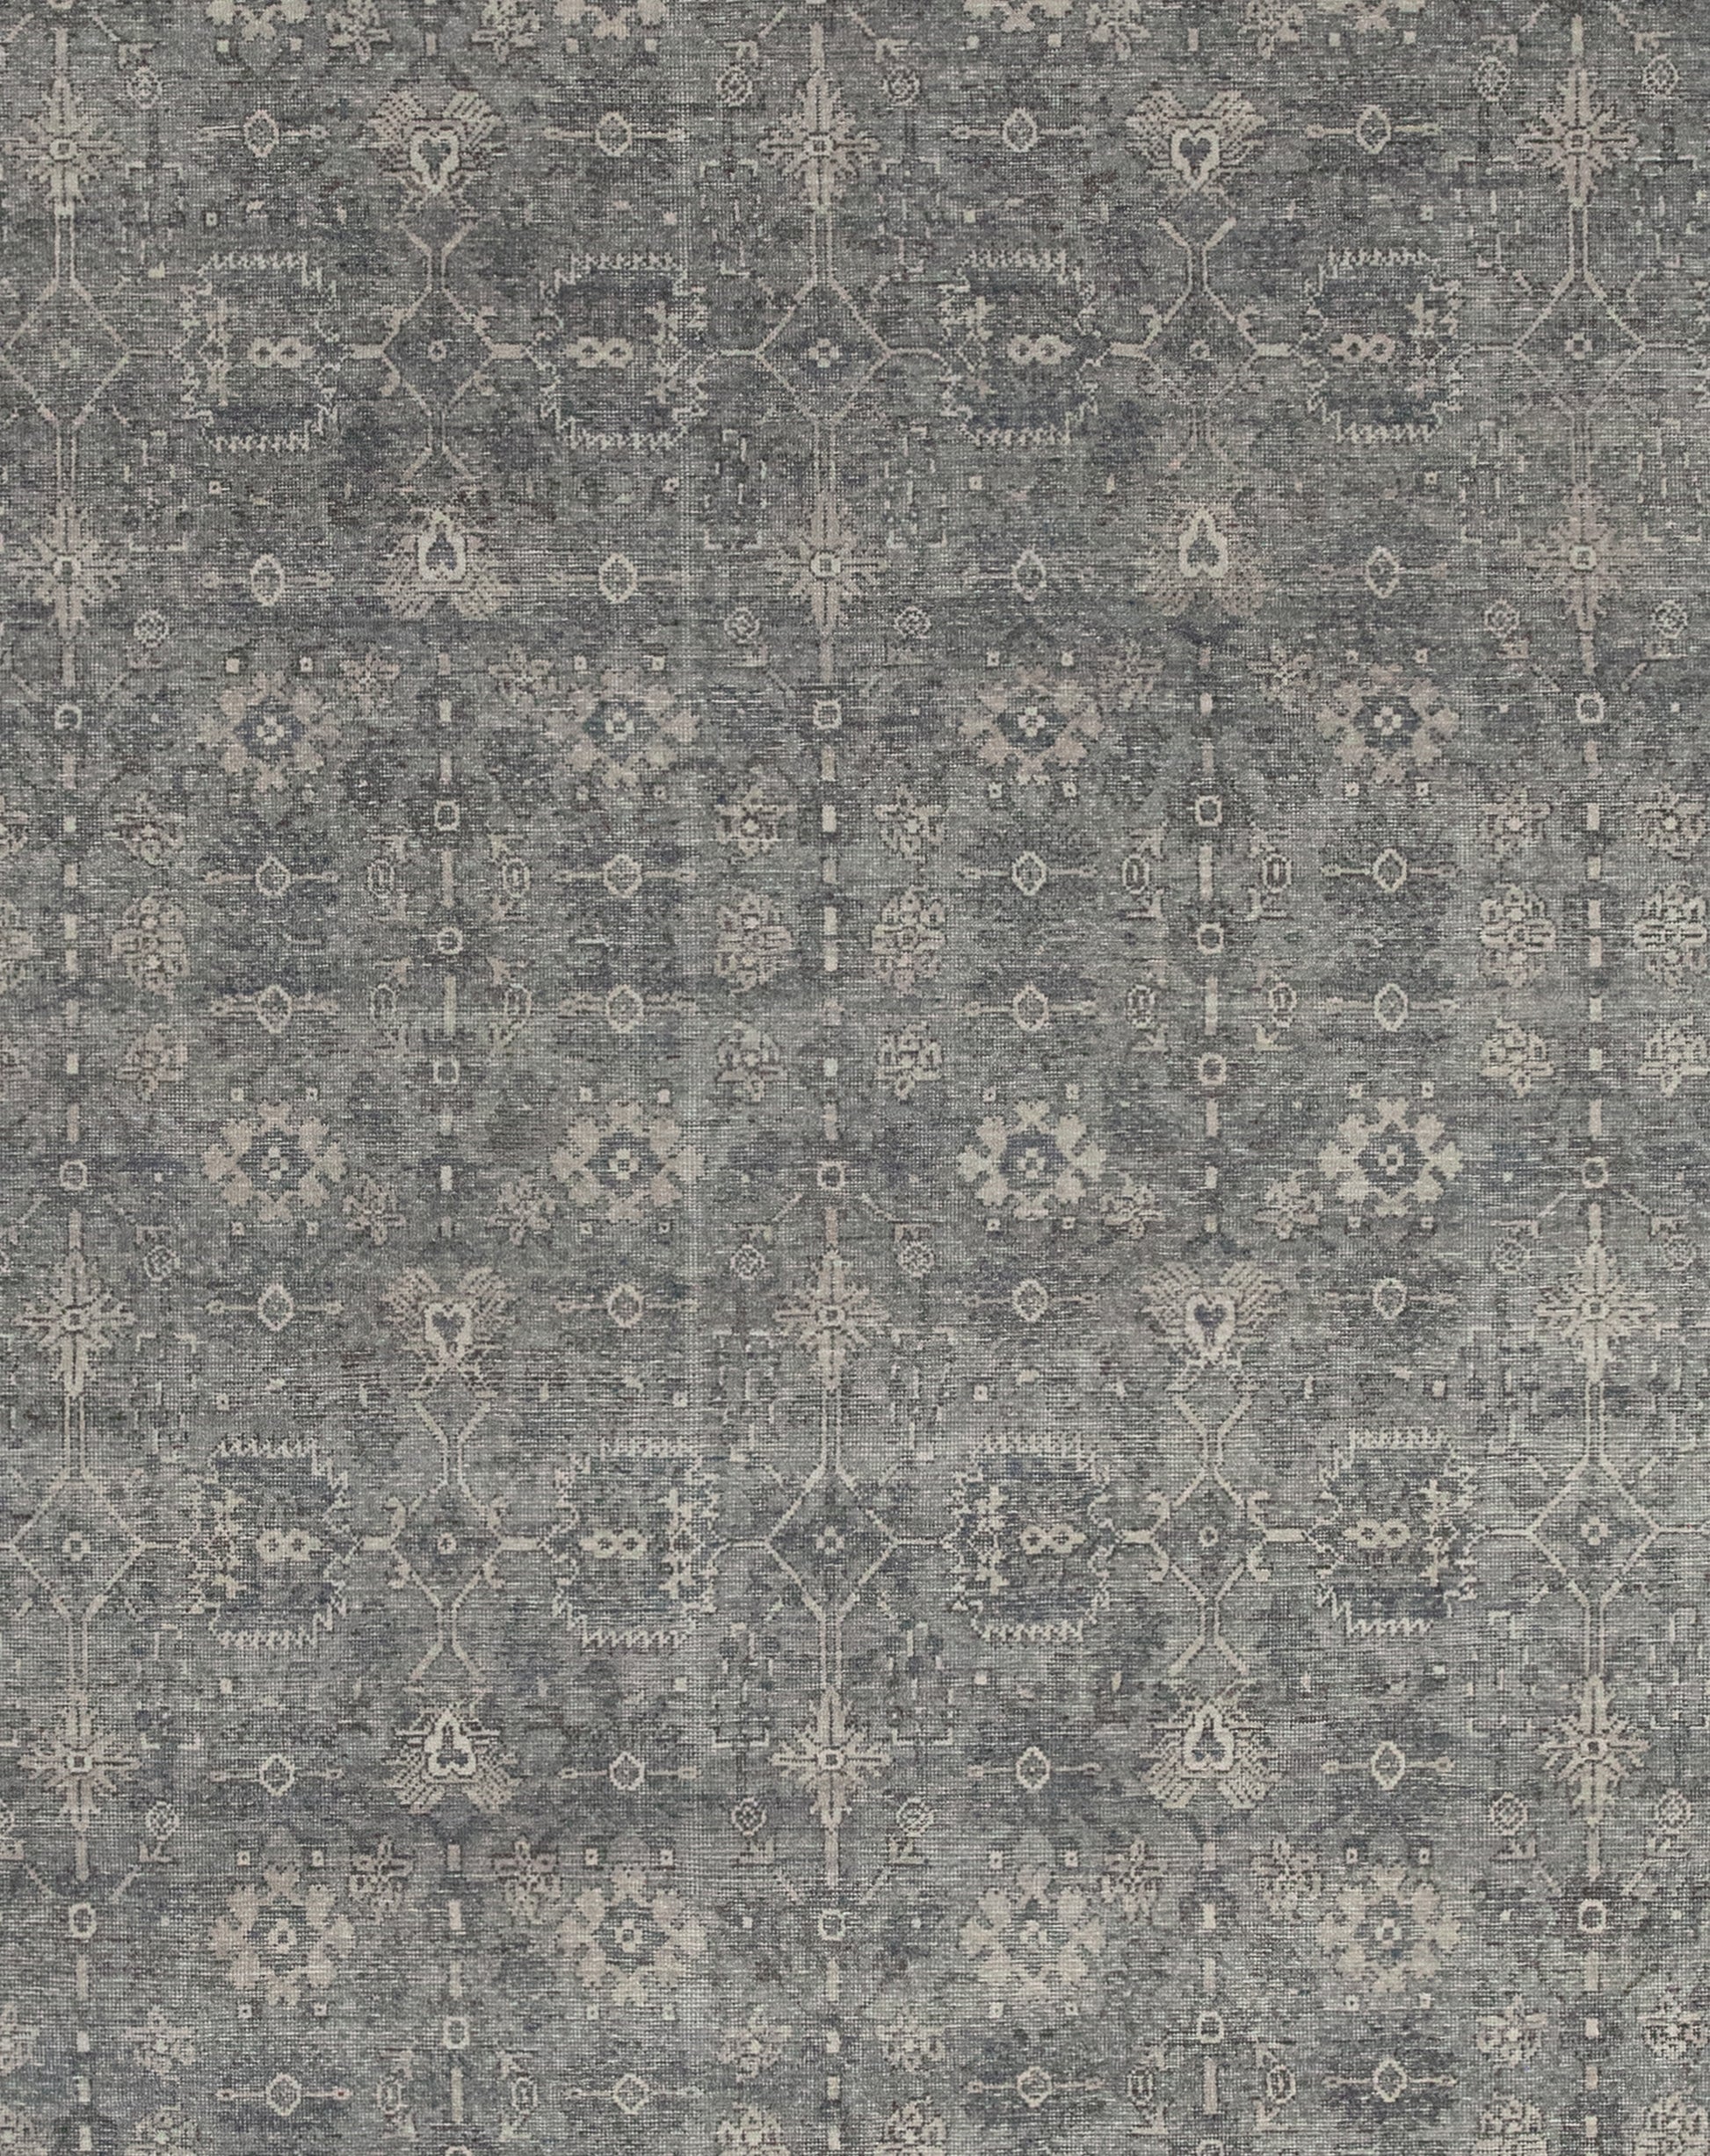 The center's close-up shows the beige pattern well distributed over the gray background.